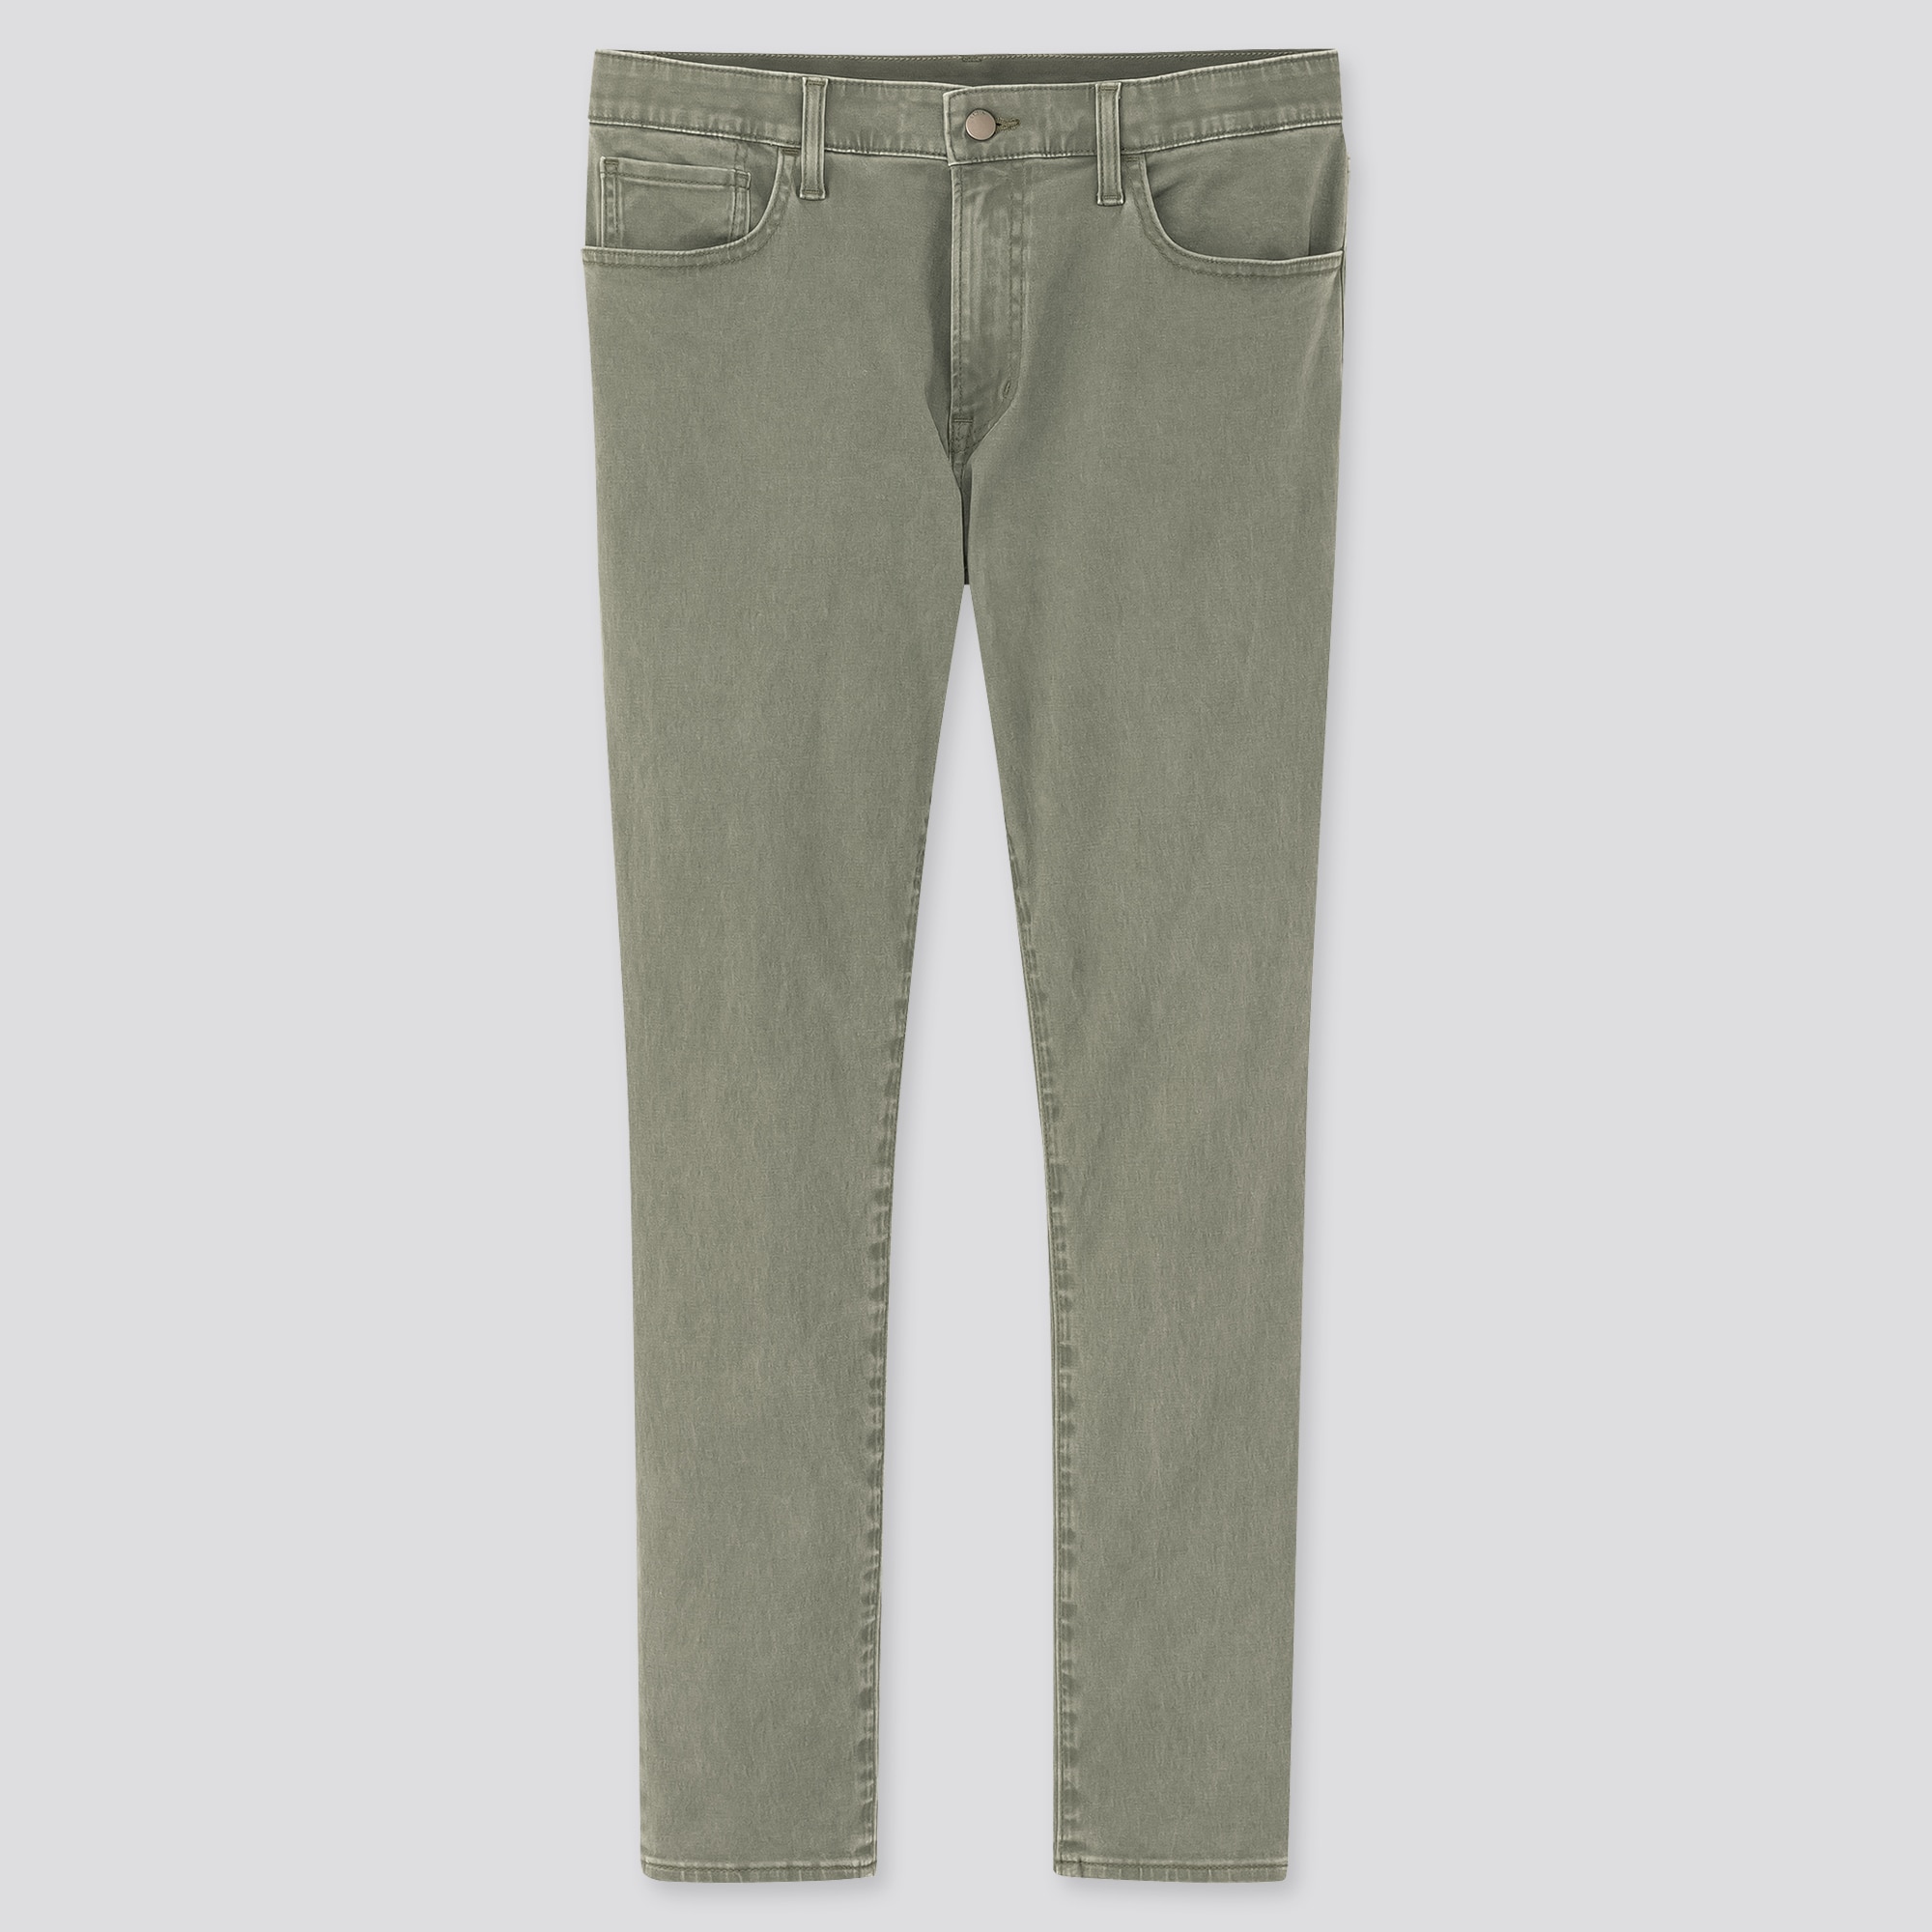 uniqlo ezy skinny fit colored jeans